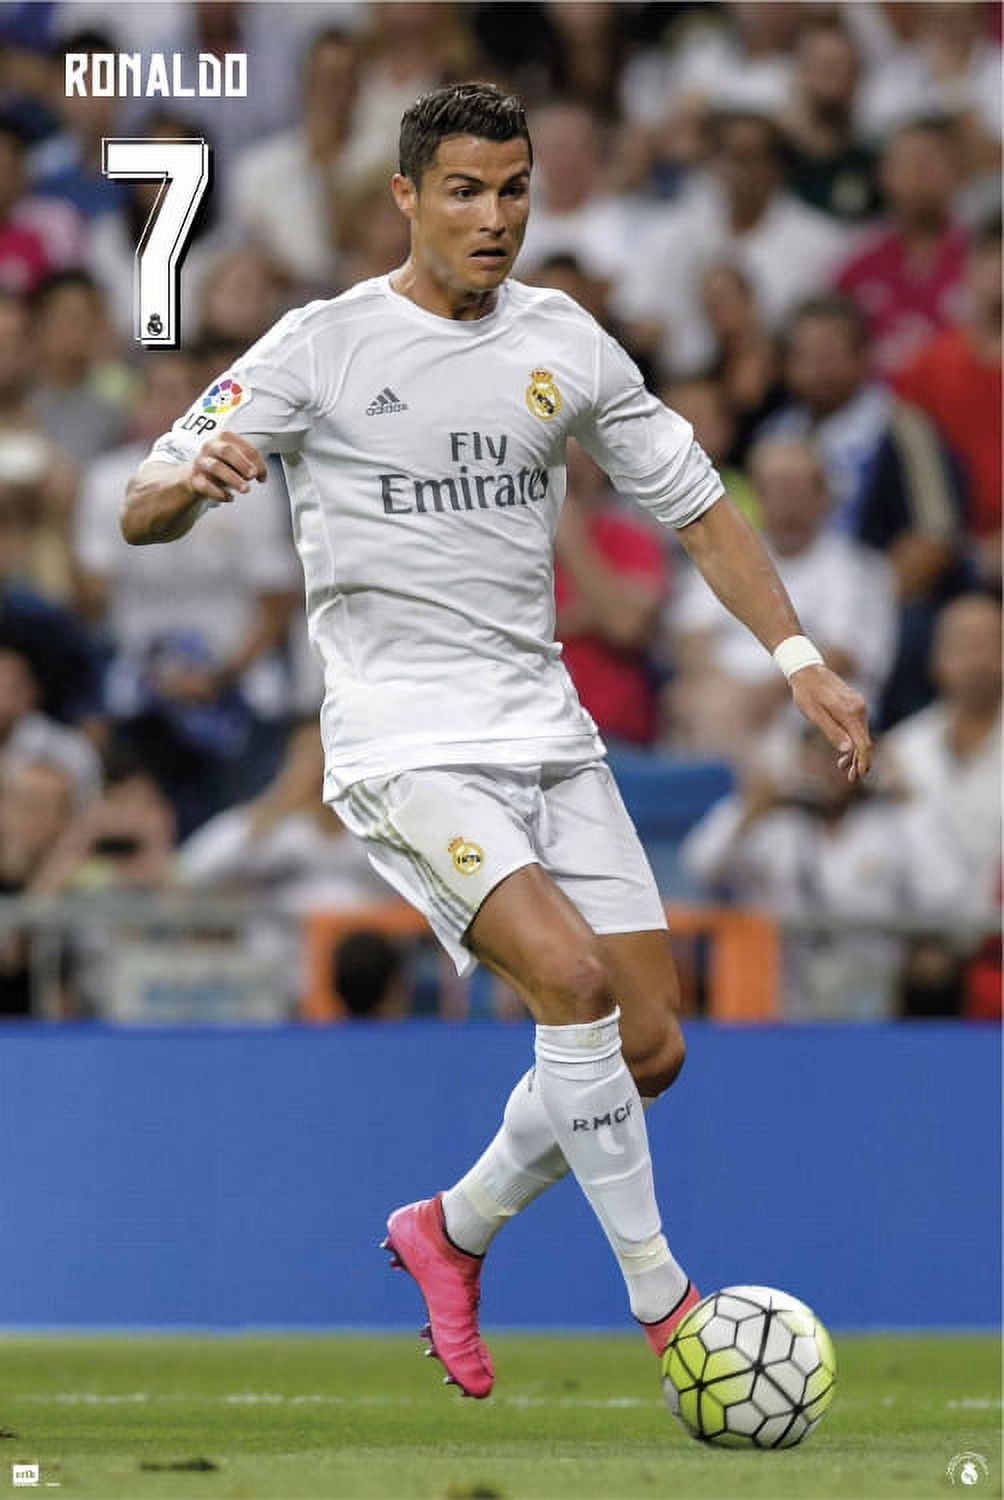 Real Madrid Ronaldo-Action Official Soccer Player Poster 2015/16 - Buy  Online